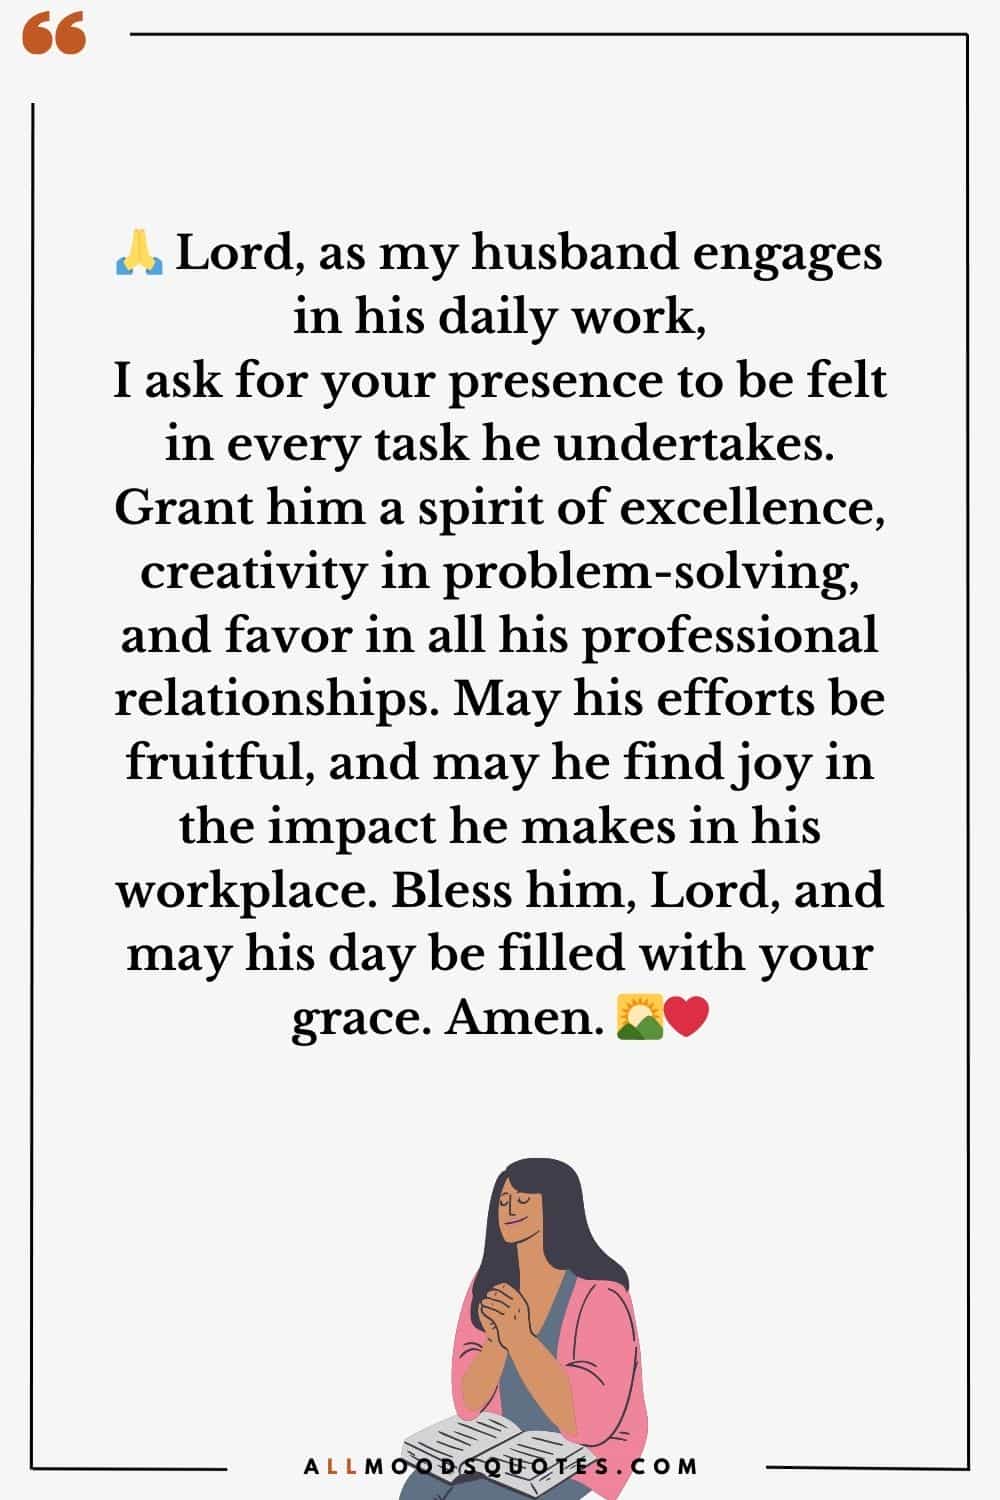 Good Morning Prayer For My Husband At Work 10. 🙏 Lord, as my husband engages in his daily work, I ask for your presence to be felt in every task he undertakes. Grant him a spirit of excellence, creativity in problem-solving, and favor in all his professional relationships. May his efforts be fruitful, and may he find joy in the impact he makes in his workplace. Bless him, Lord, and may his day be filled with your grace. Amen. 🌄❤️